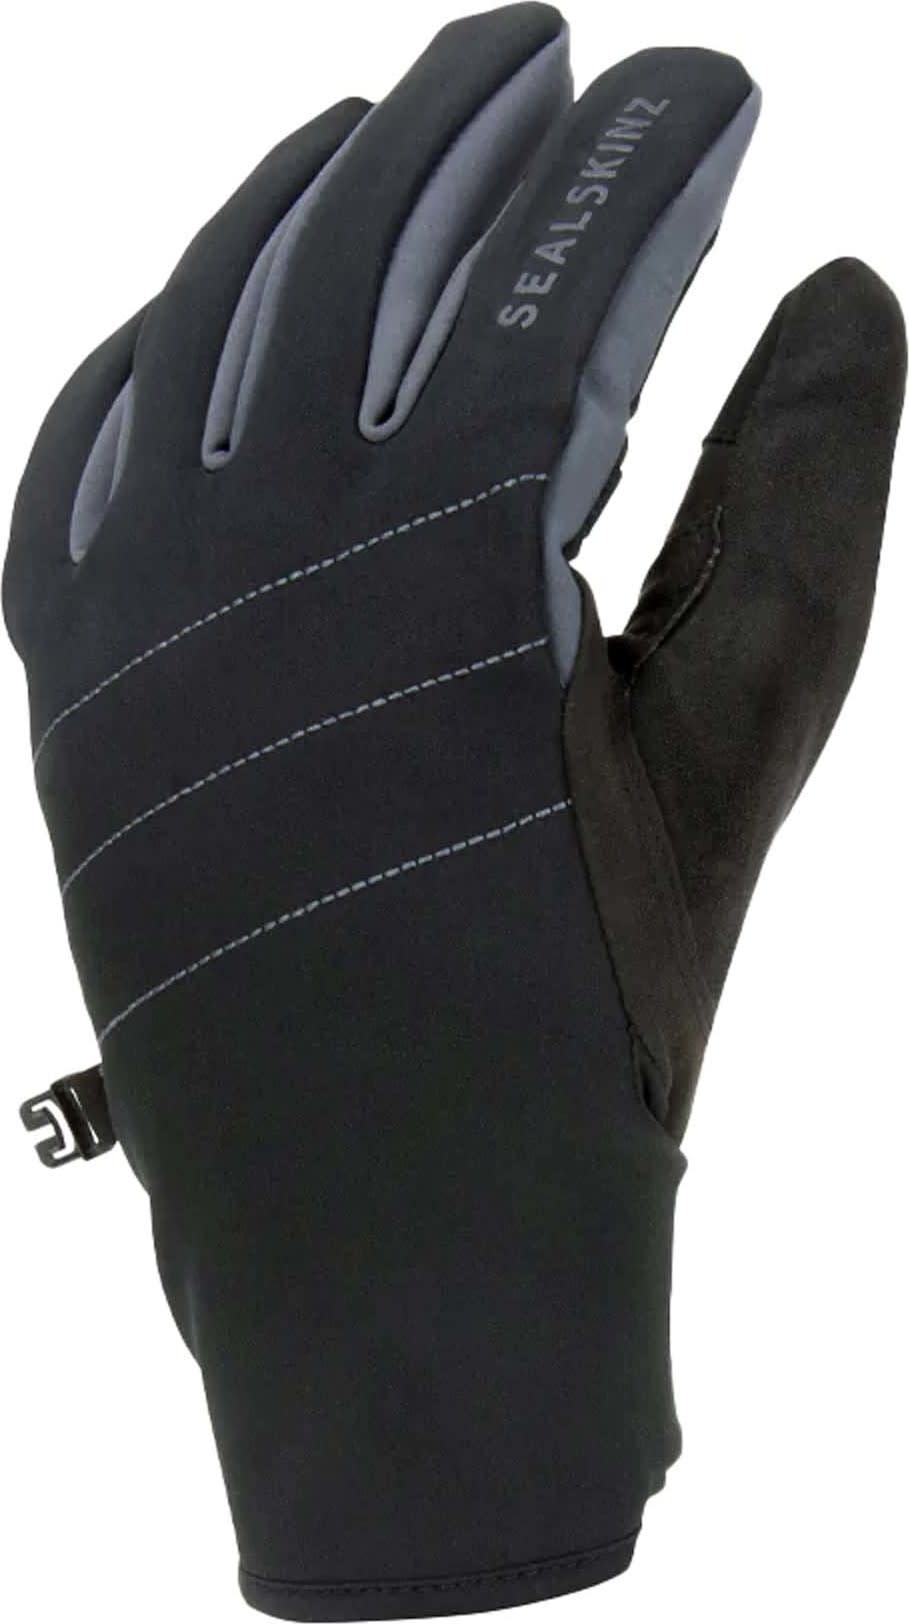 Waterproof All Weather Glove with Fusion Control Black/Grey